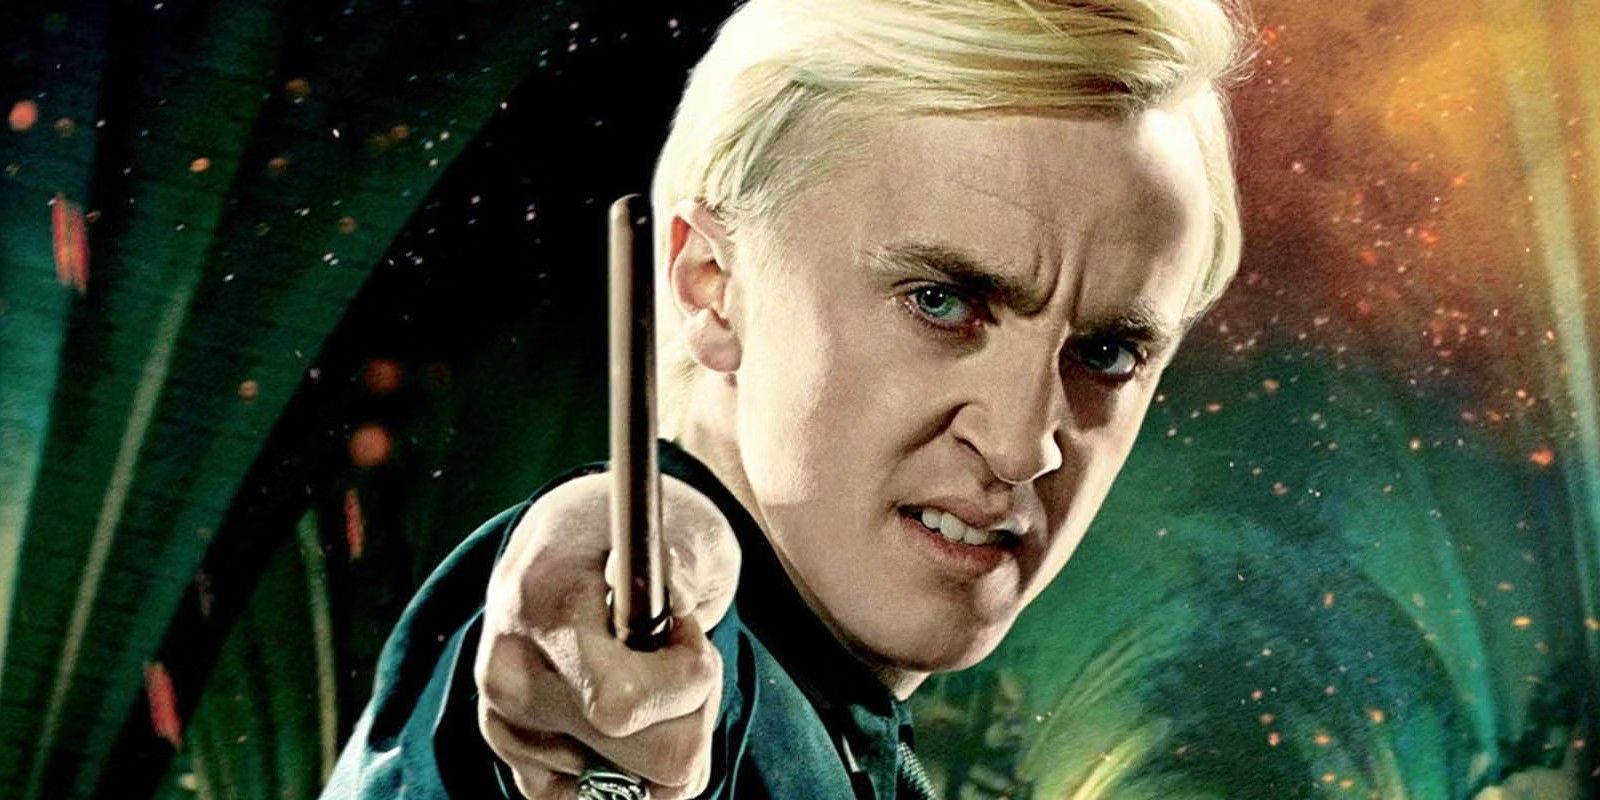 Draco Malfoy holding his wand in Harry Potter. 